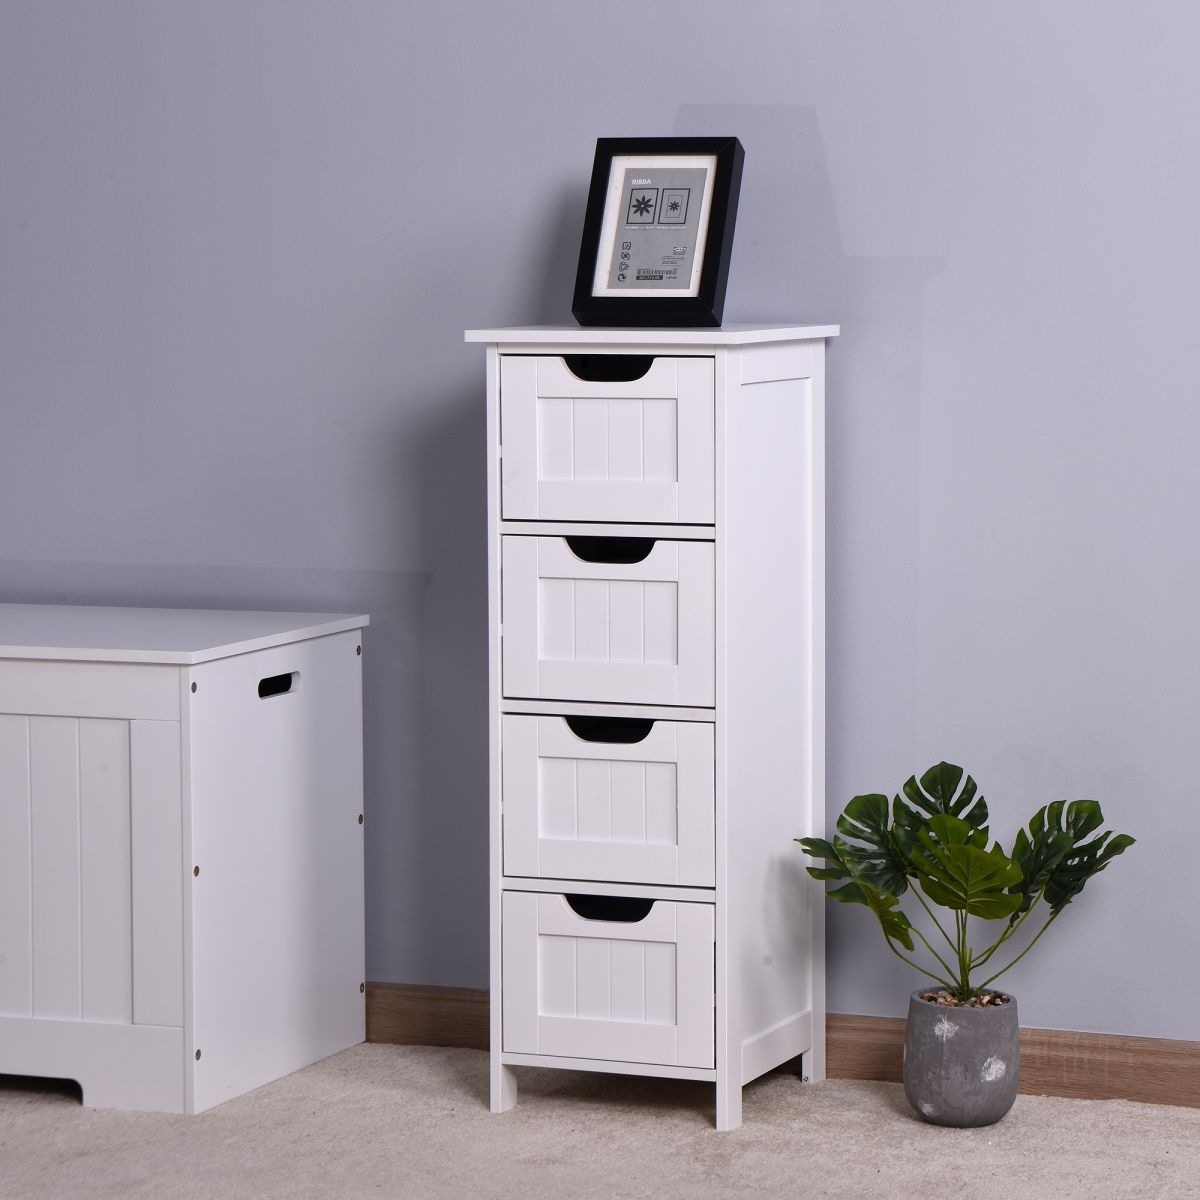 https://ak1.ostkcdn.com/images/products/is/images/direct/bffa75628279ade3fe1c182a2c67d2f9ee823695/White-Bathroom-Storage-Cabinet%2C-Freestanding-Cabinet-with-Drawers.jpg